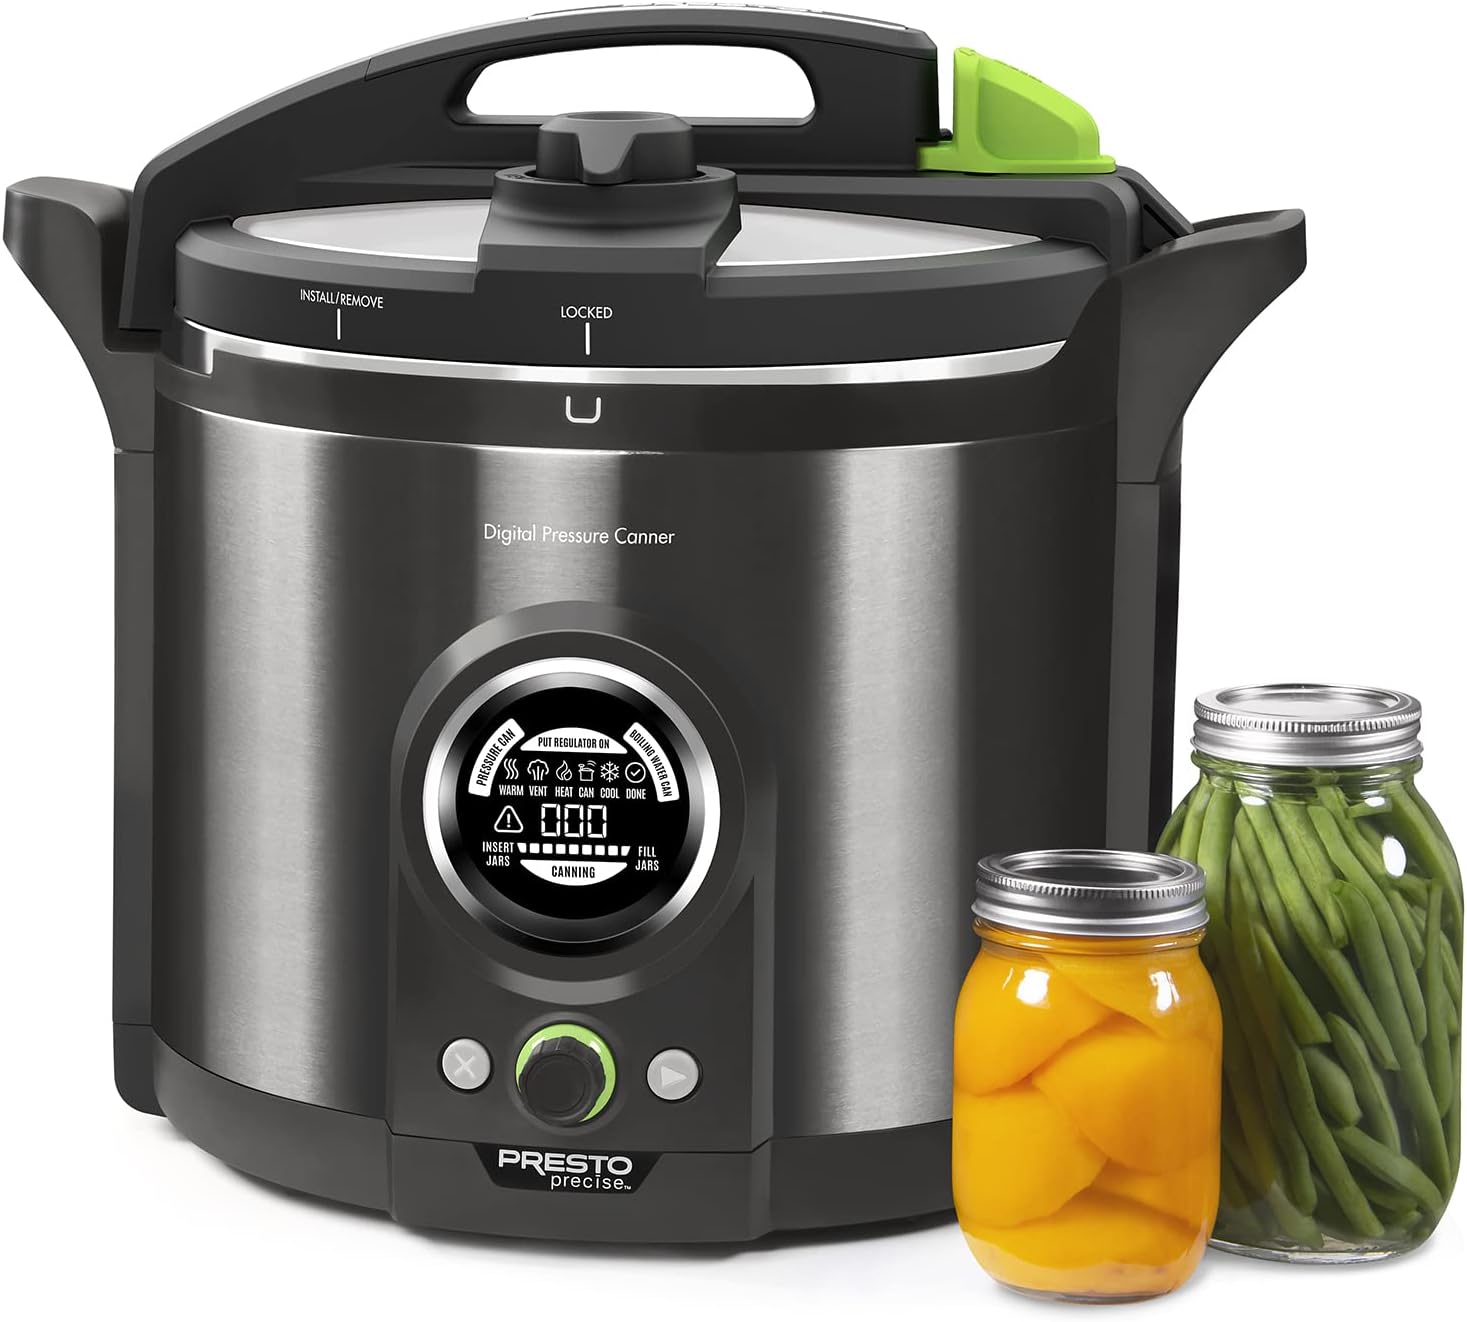 12 Qt Stainless steel Electric Pressure Canner